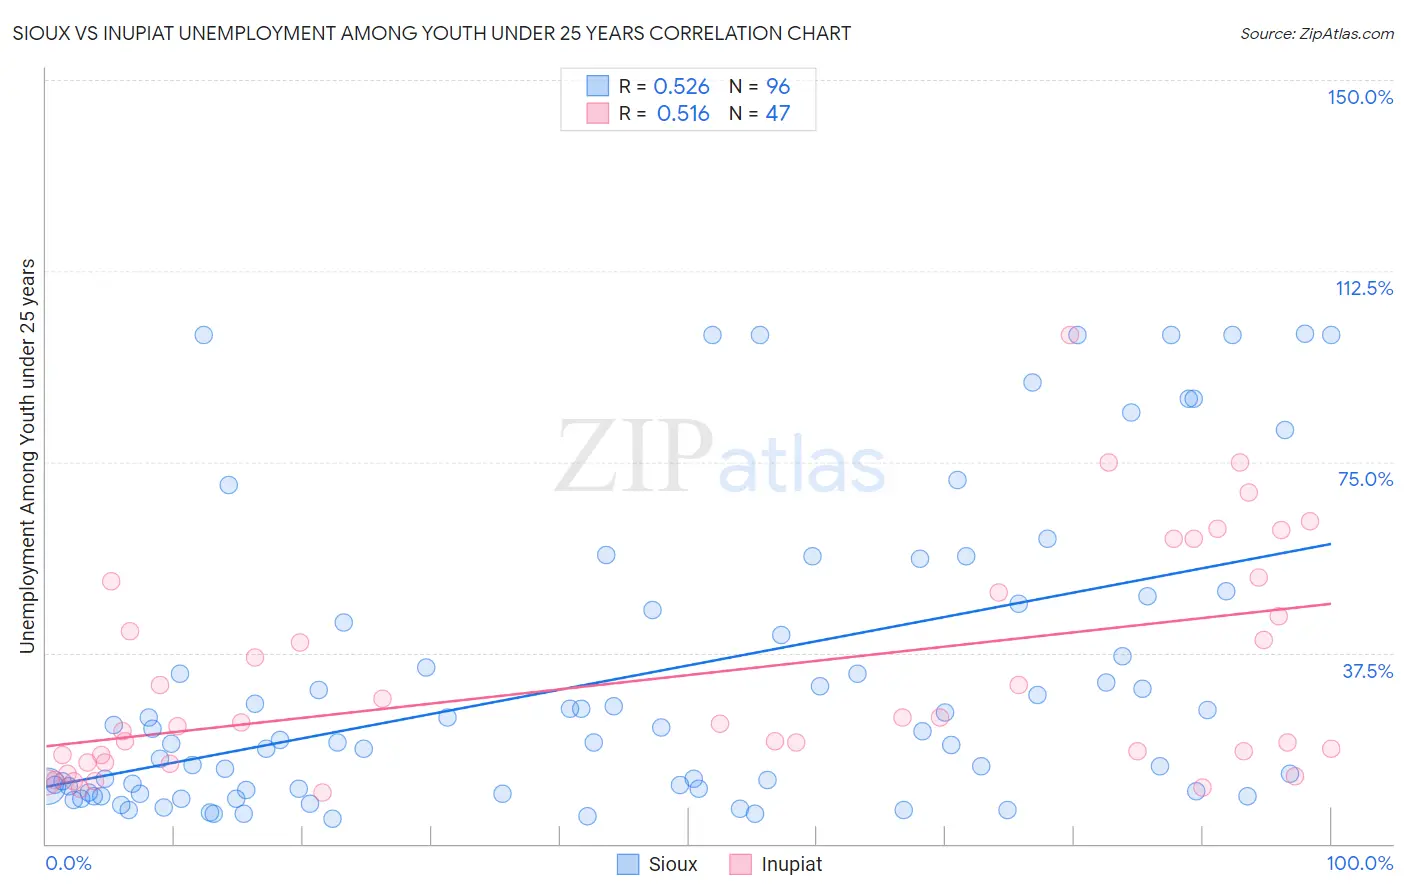 Sioux vs Inupiat Unemployment Among Youth under 25 years